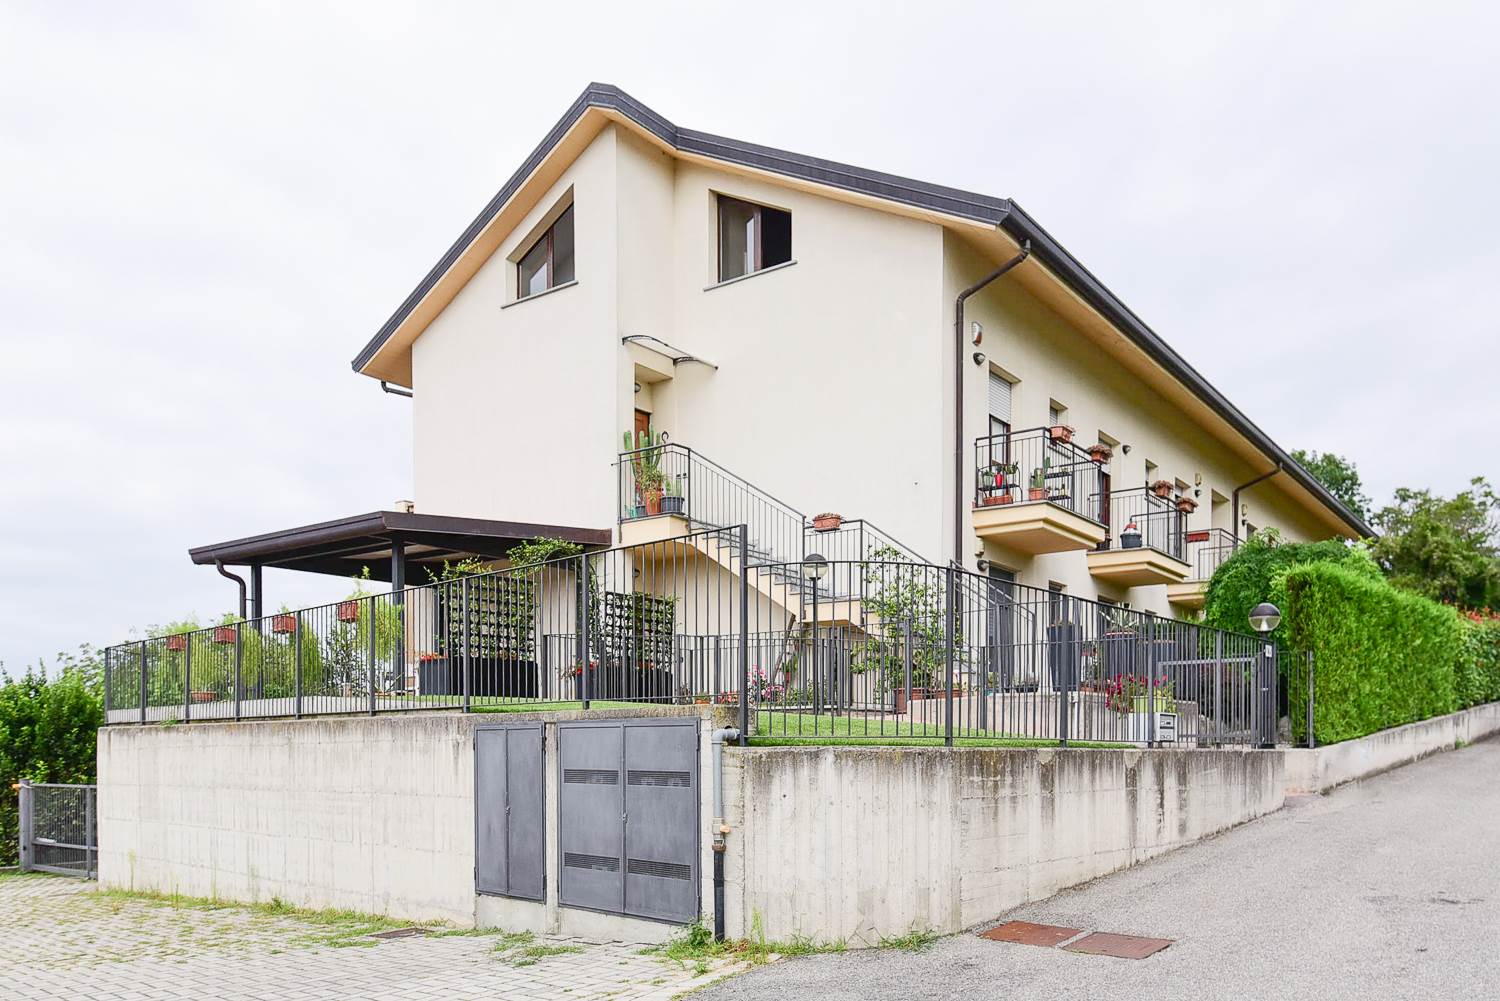 CREMNAGO, INVERIGO, Apartment for sale of 90 Sq. mt., Excellent Condition, Heating Individual heating system, Energetic class: F, Epi: 175 kwh/m2 